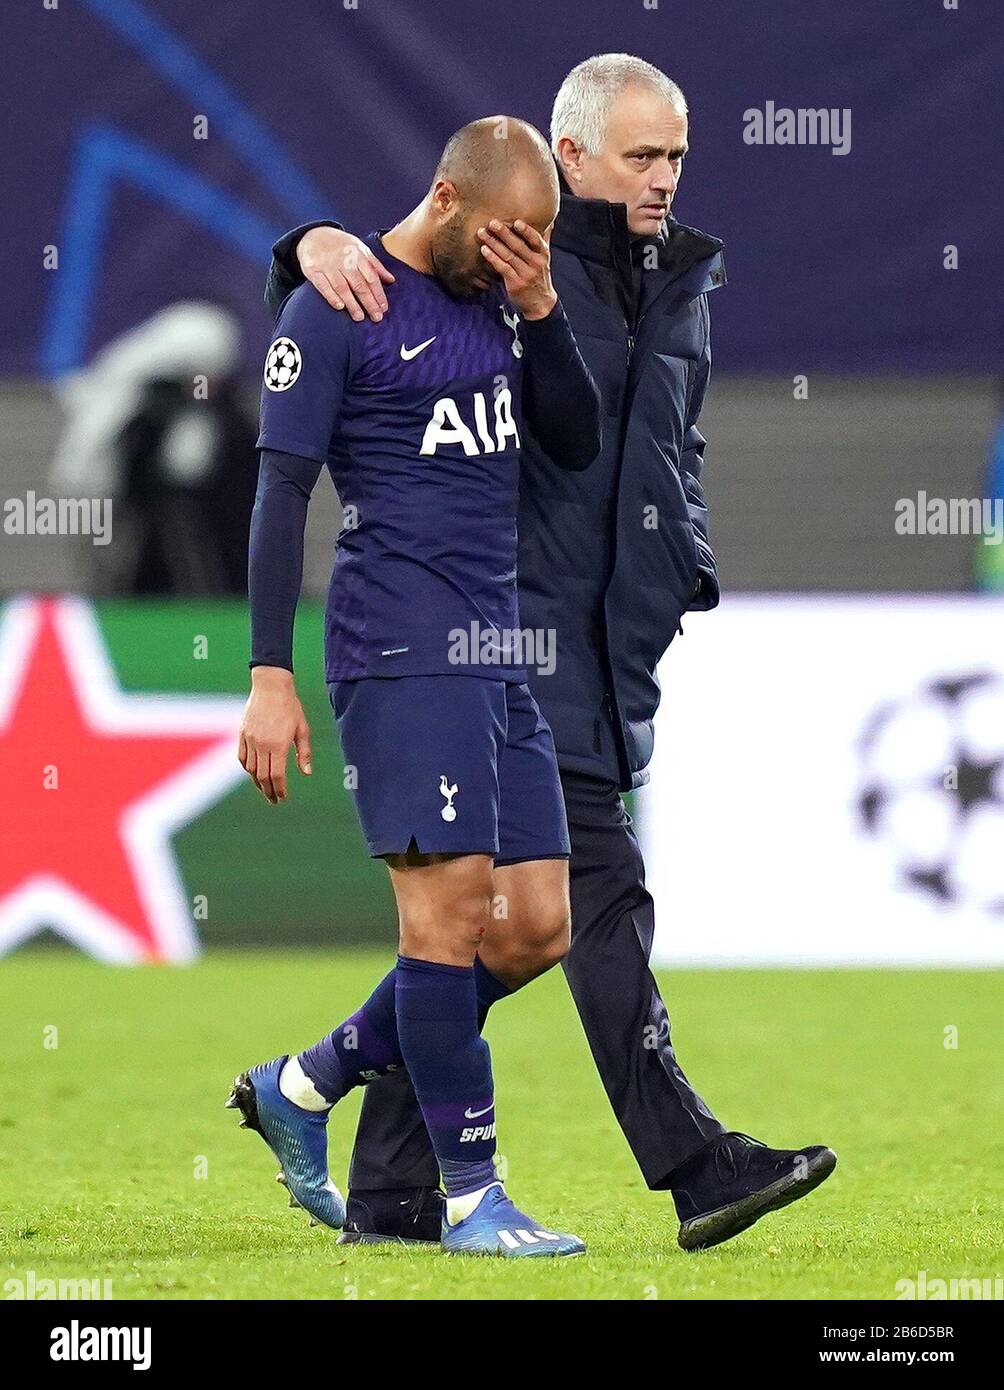 Tottenham Hotspur's Lucas Moura (left) and manager Jose Mourinho appear dejected after the final whistle at the UEFA Champions League round of 16 second leg match at the Red Bull Arena, Leipzig. Stock Photo